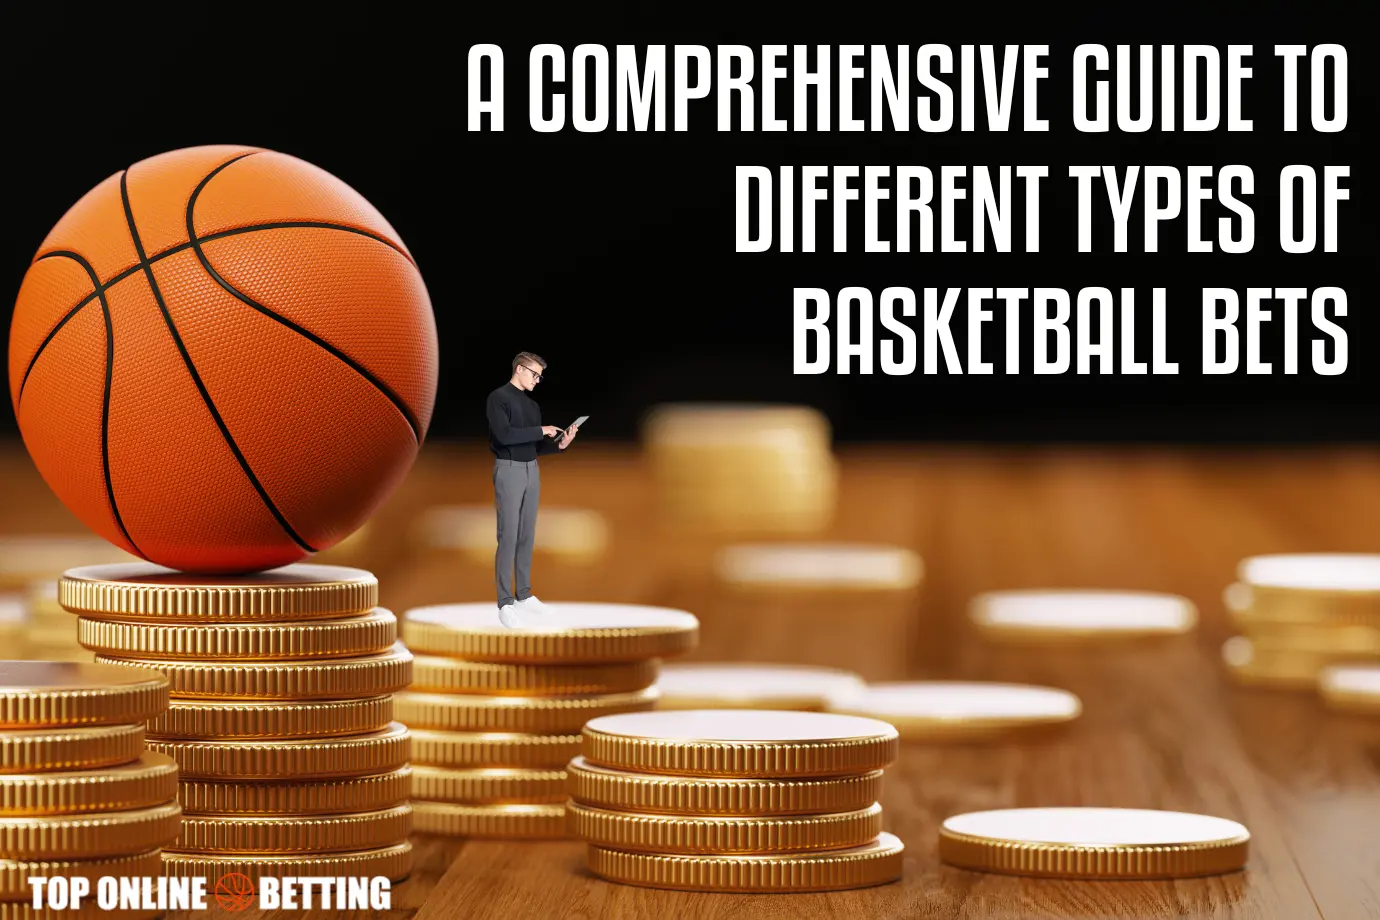 A Comprehensive Guide to Different Types of Basketball Bets